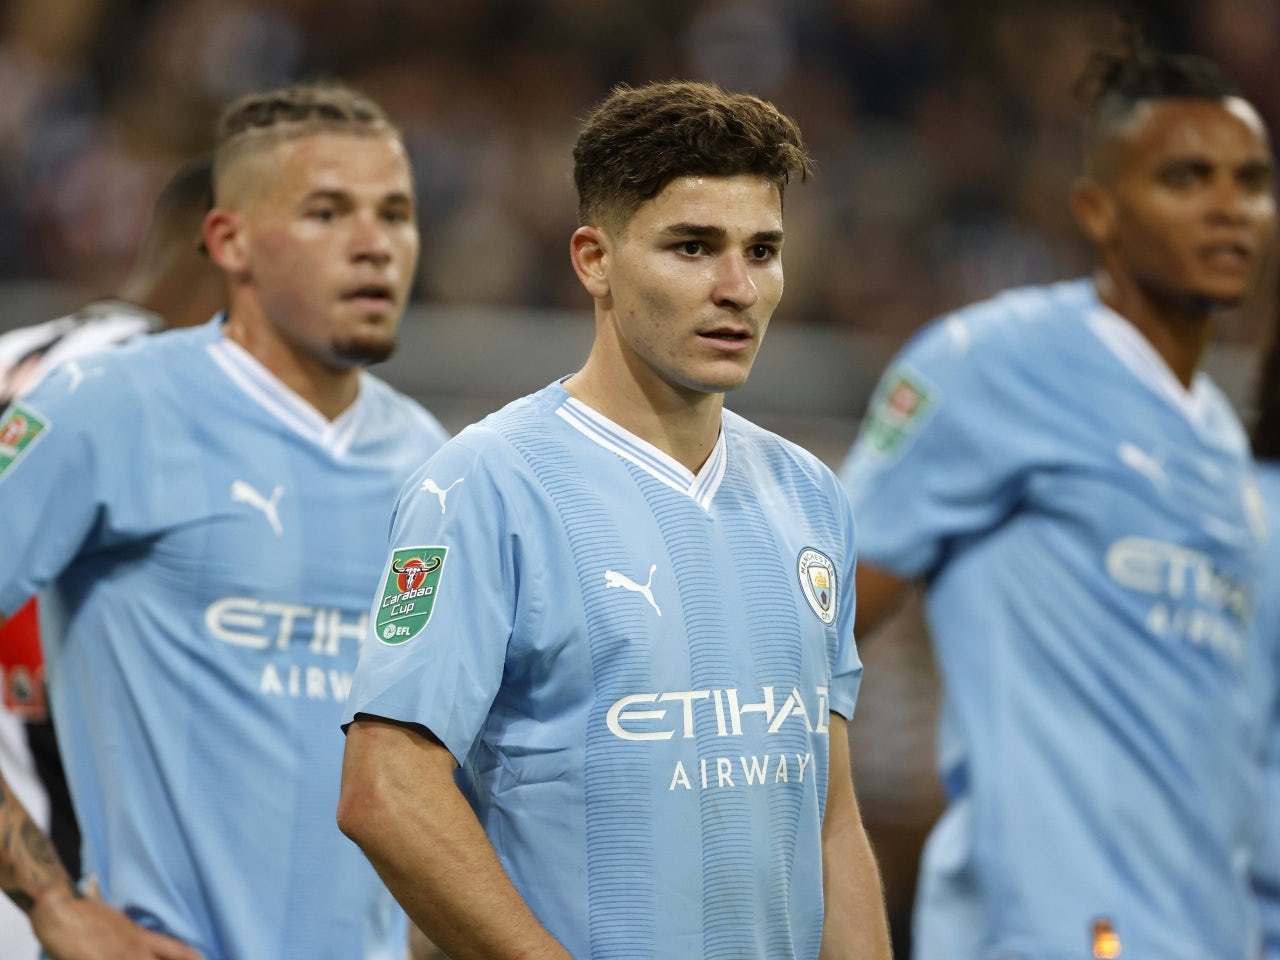 Man City transfer news and rumours: Eight players who could be sold or loaned out this summer